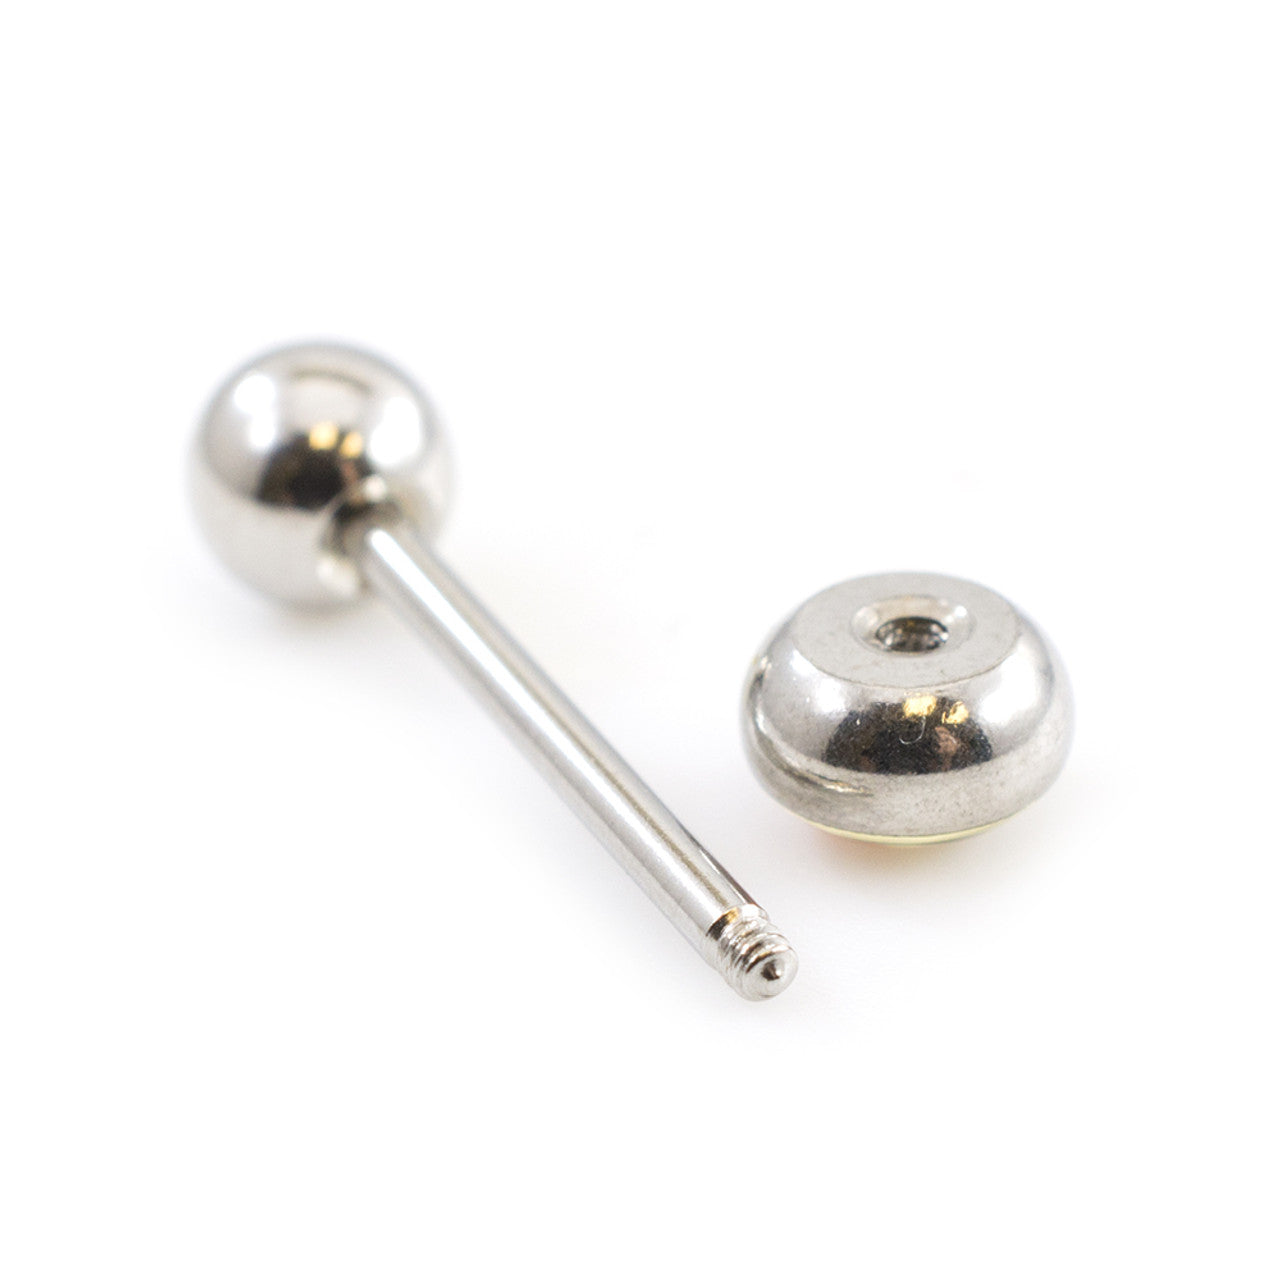 Surgical Steel Tongue Ring Straight Barbell 14 Gauge & Girl Power Logo